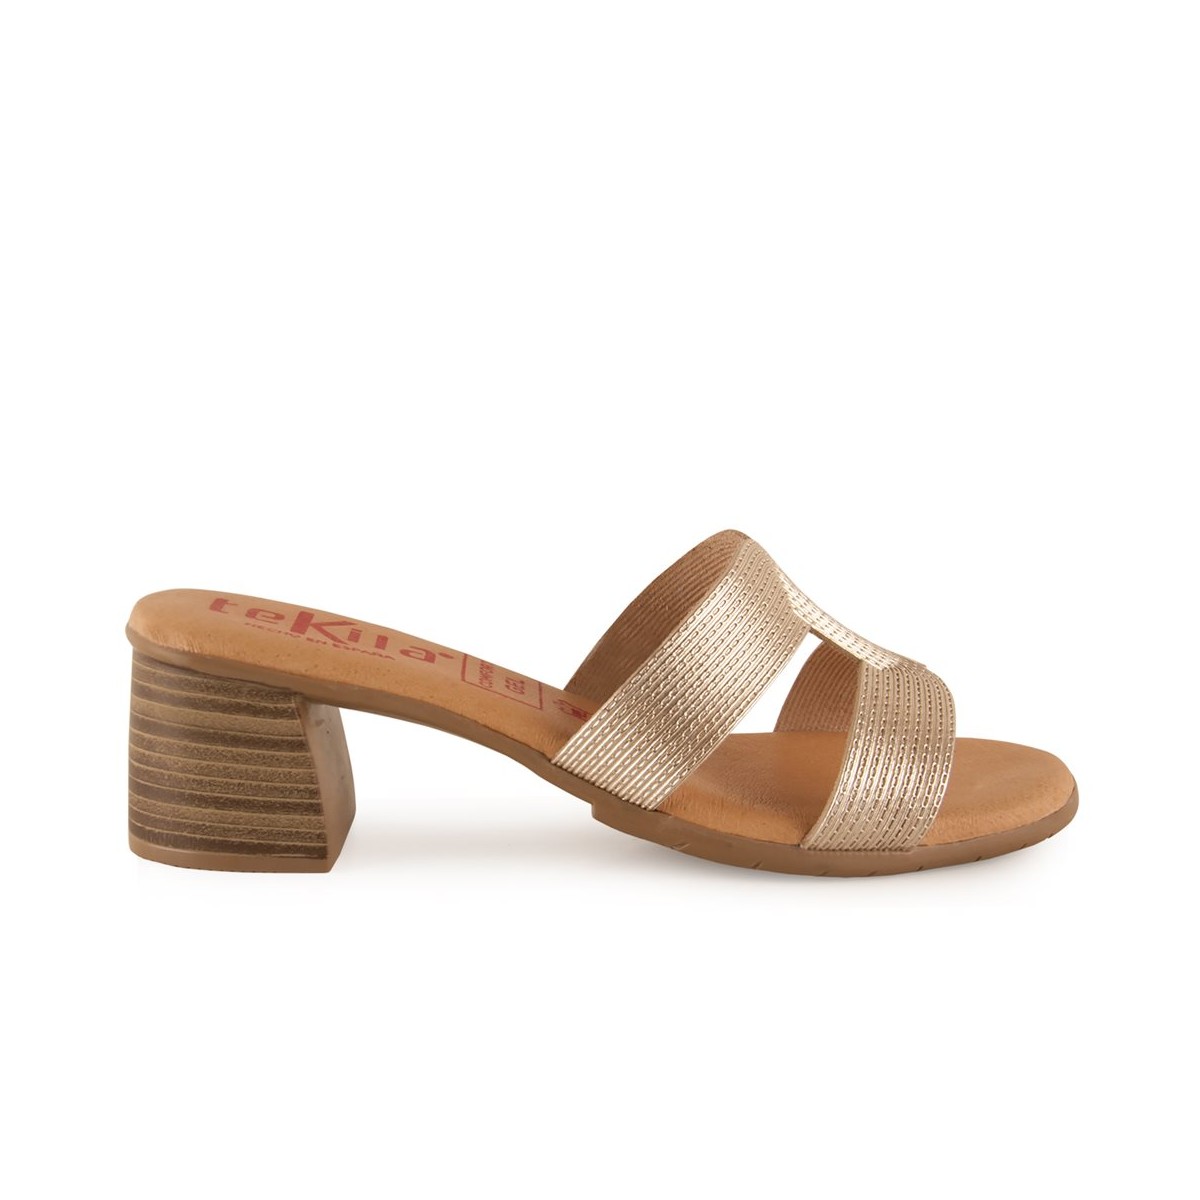 Gold leather sandals with heel by Tekila